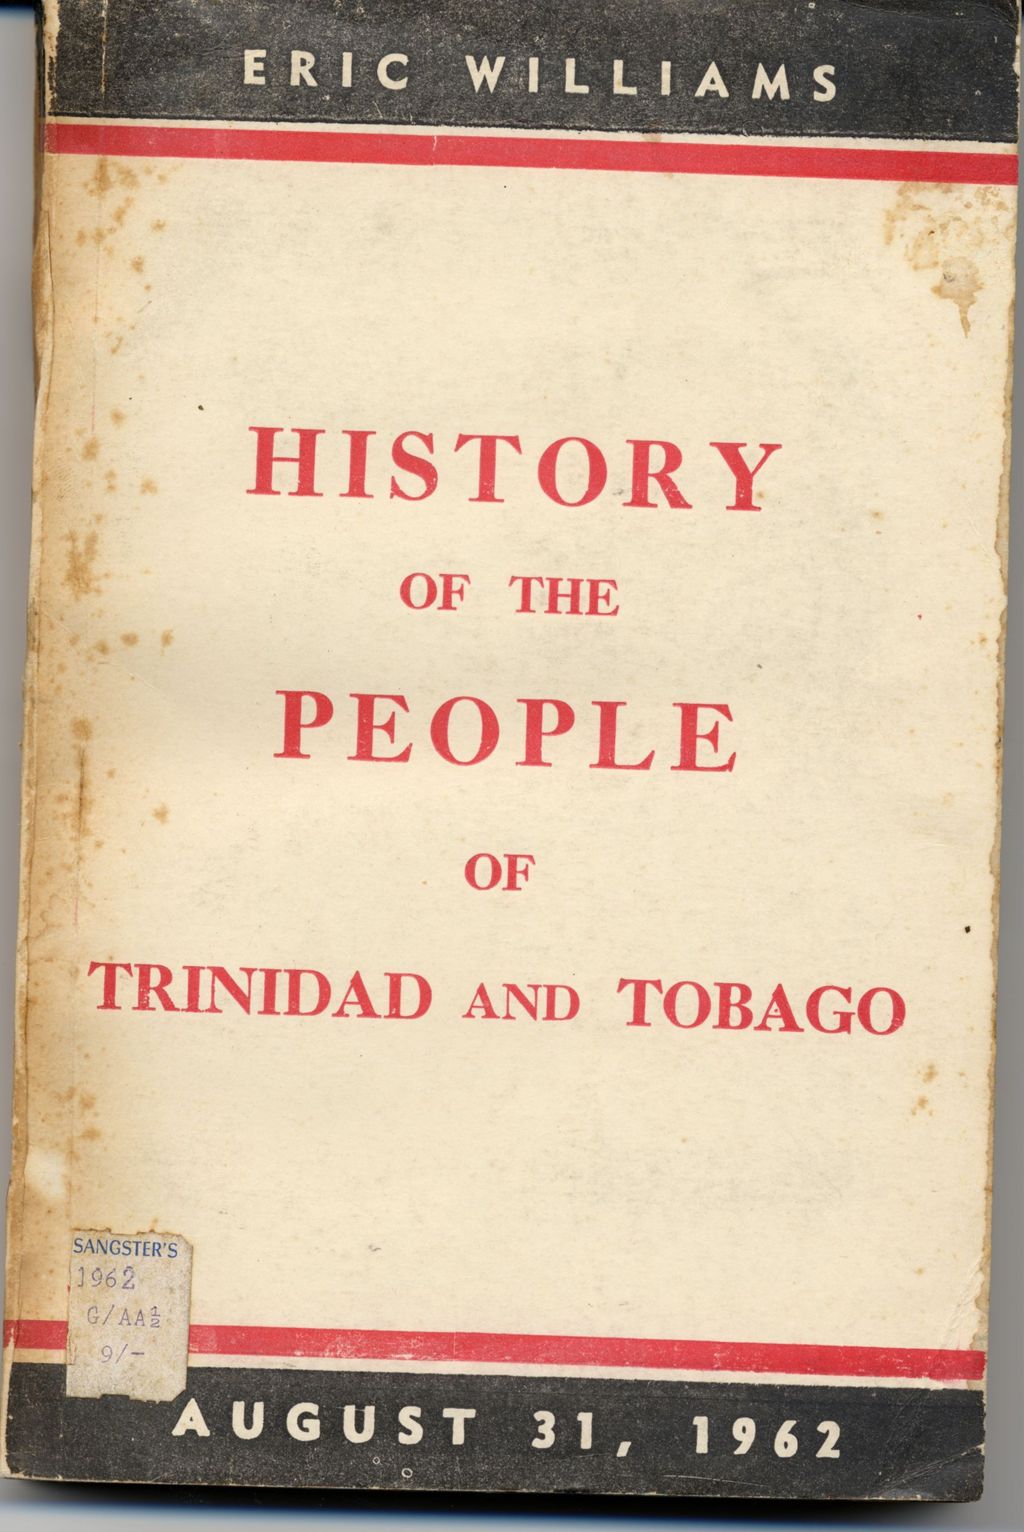 Miniature of History of the people of Trinidad and Tobago